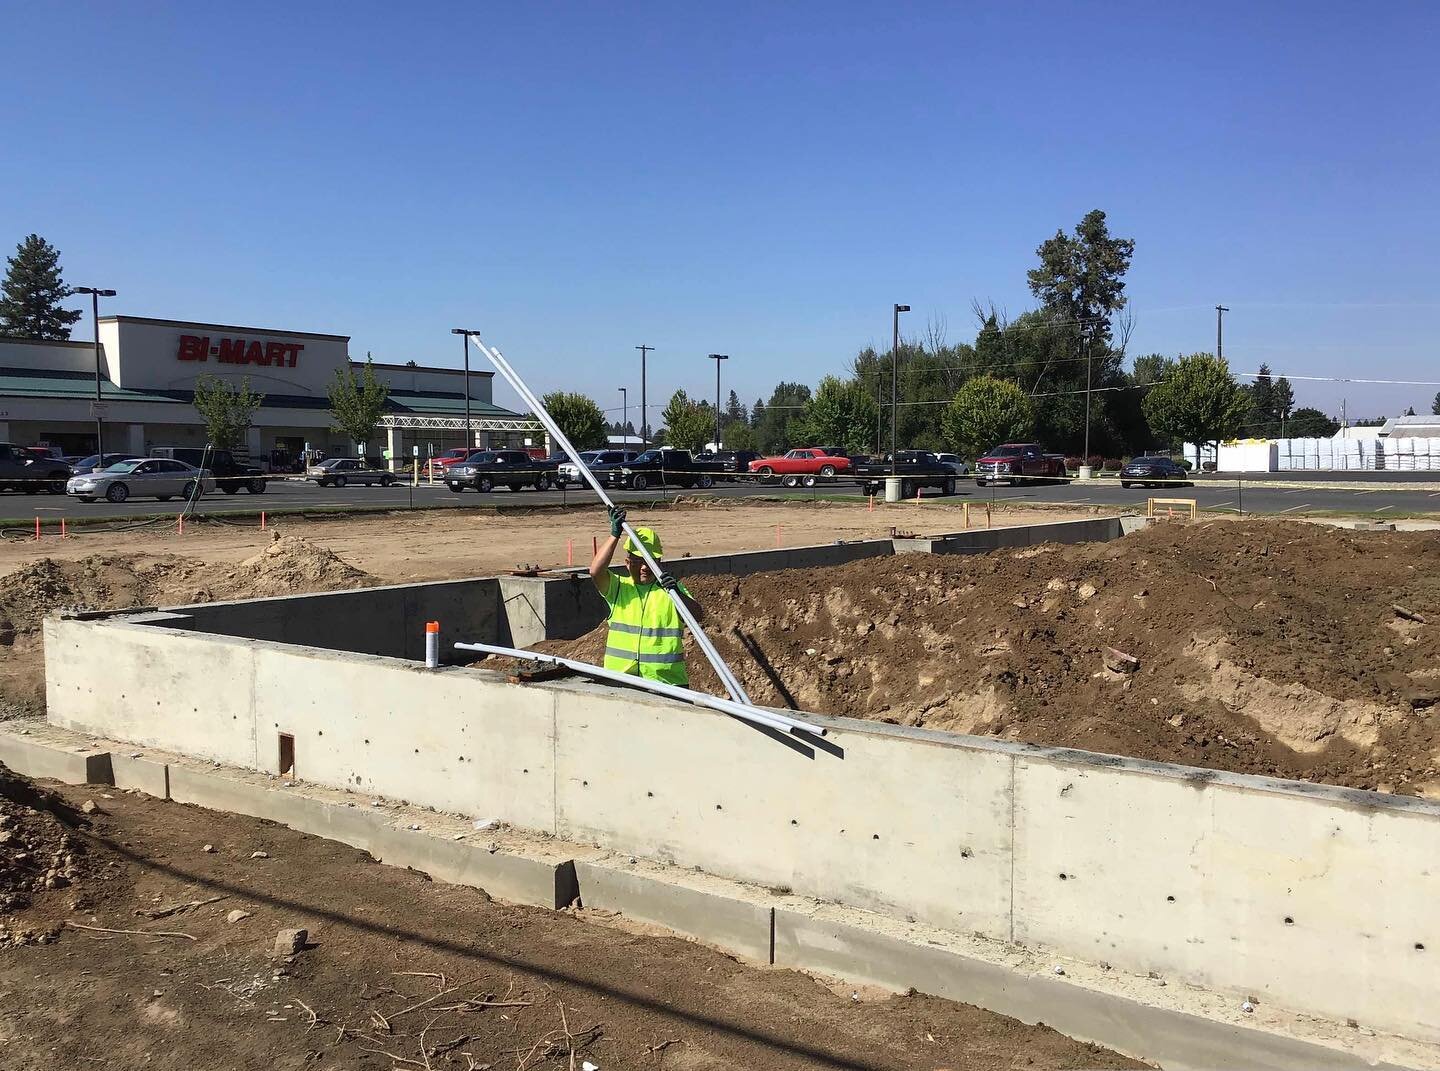 BBC in the PNW! Foundations are complete as slab rough-in begins at this O&rsquo;Reilly Auto in Deer Park, WA. #builtbetter